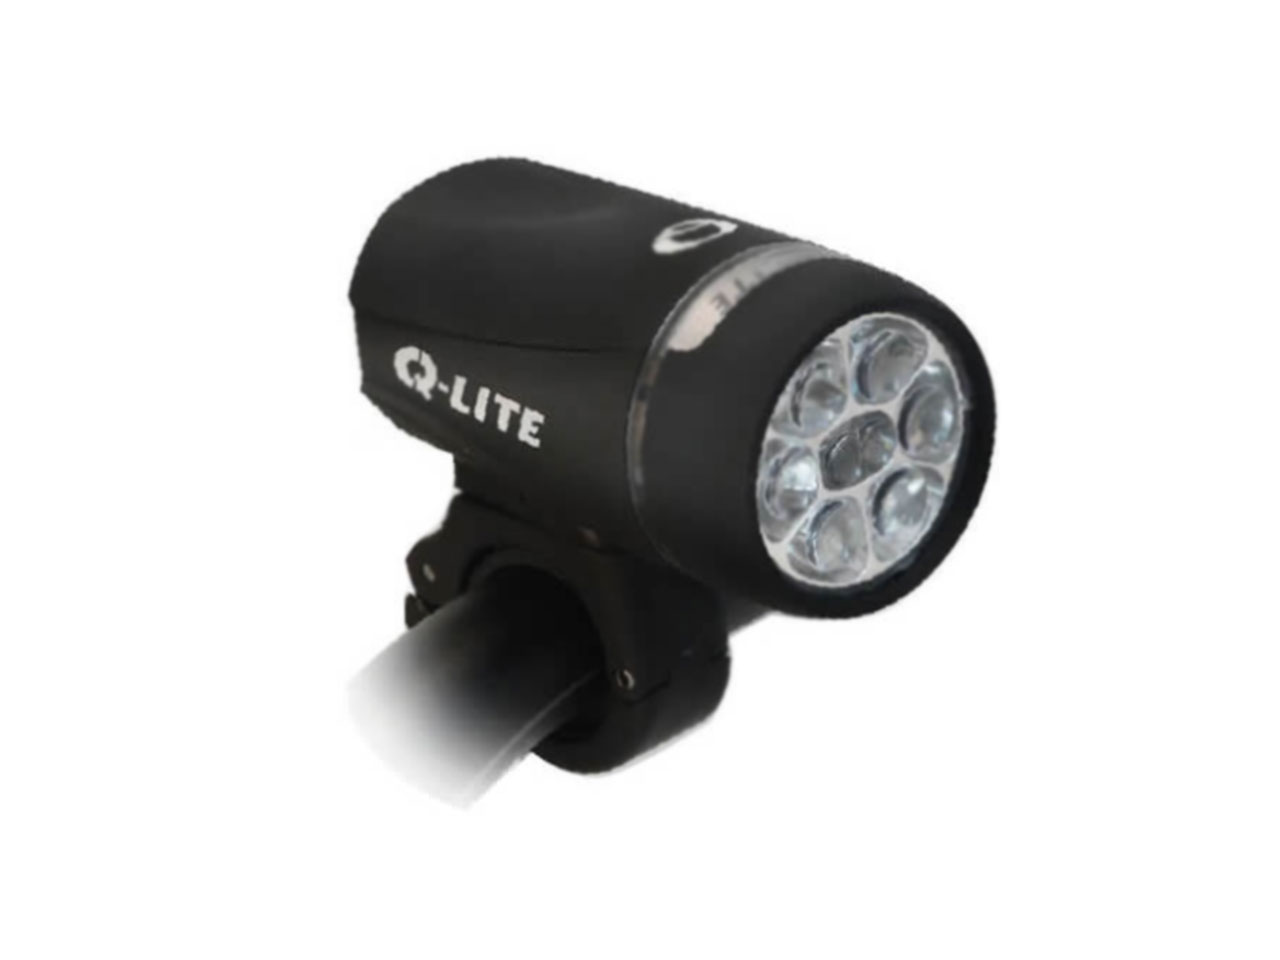 Q-Lite Star-Win 8 LED Front Bicycle Light